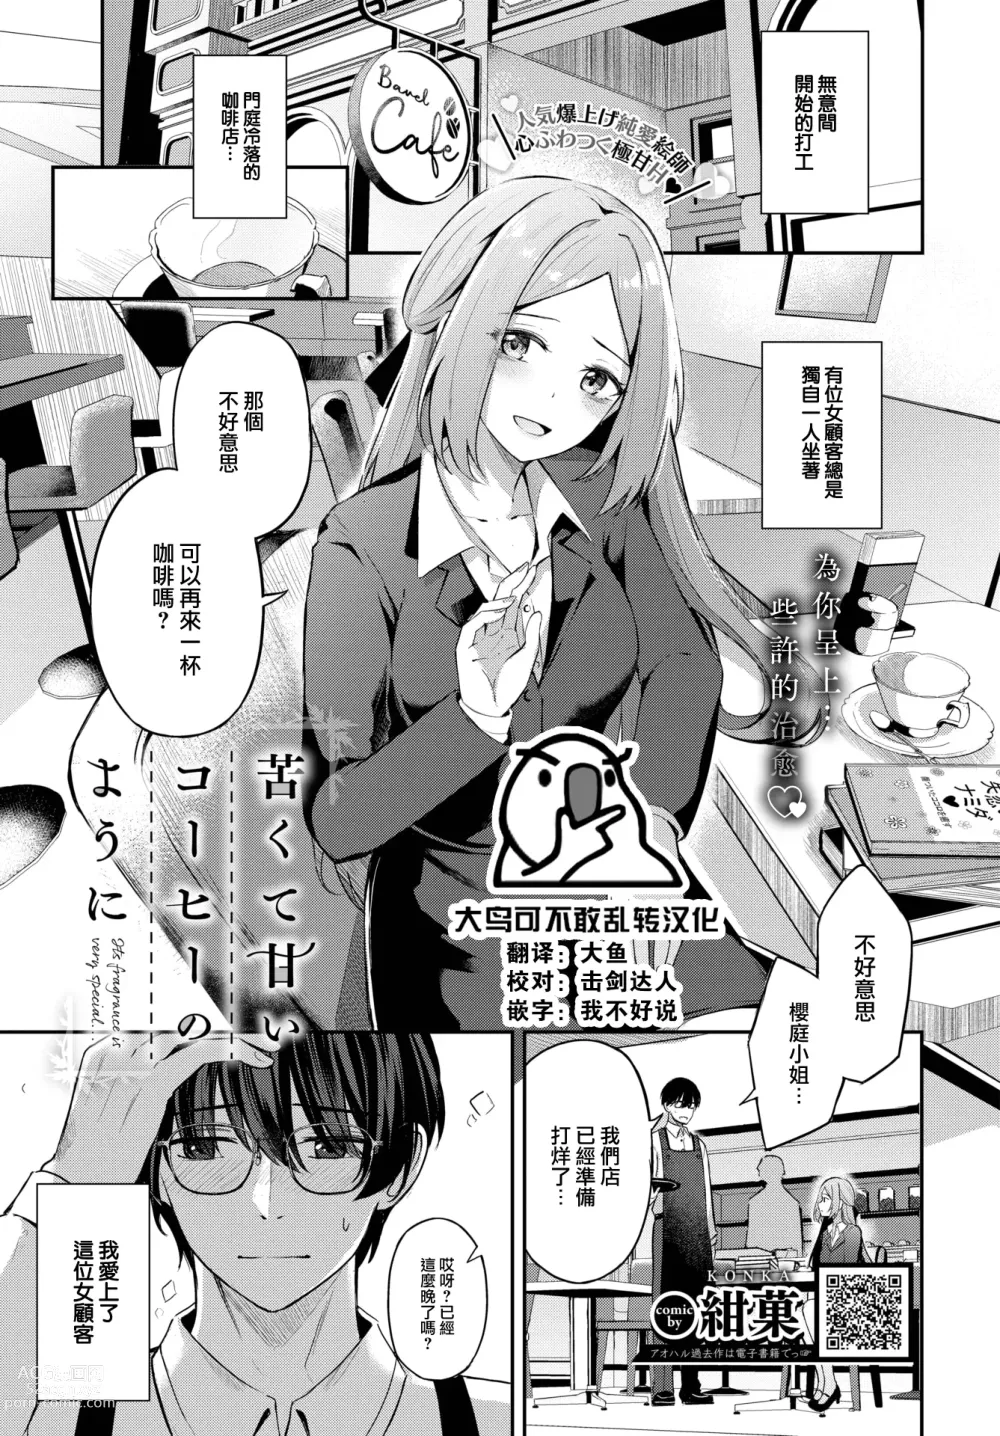 Page 1 of manga Nigakute Amai Coffee no you ni - Its fragrance is very special...